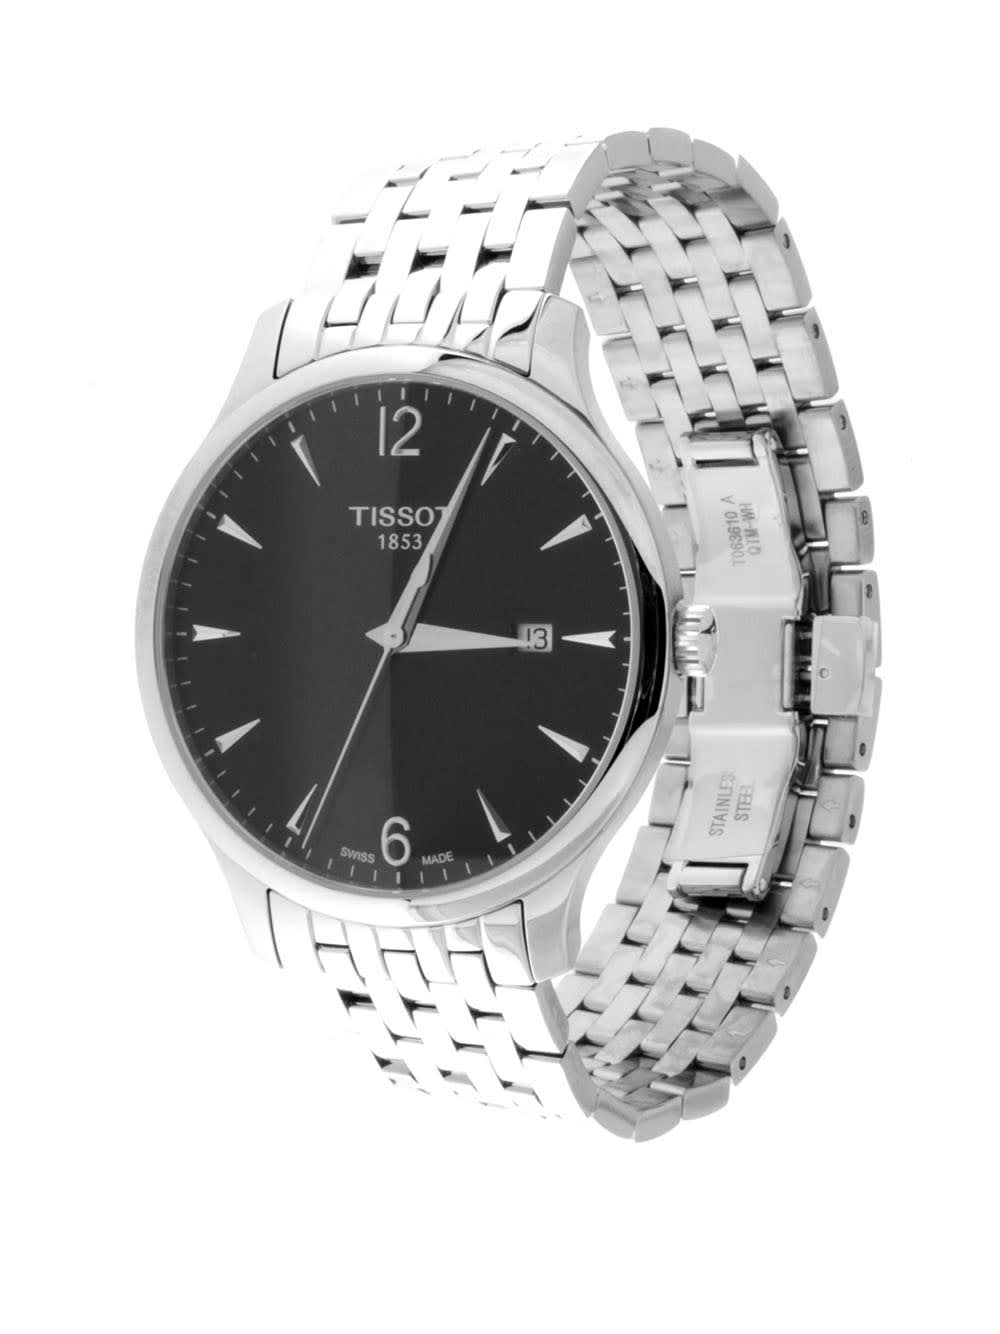 Tissot Tradition T0636101105700 Mens Watch Watches